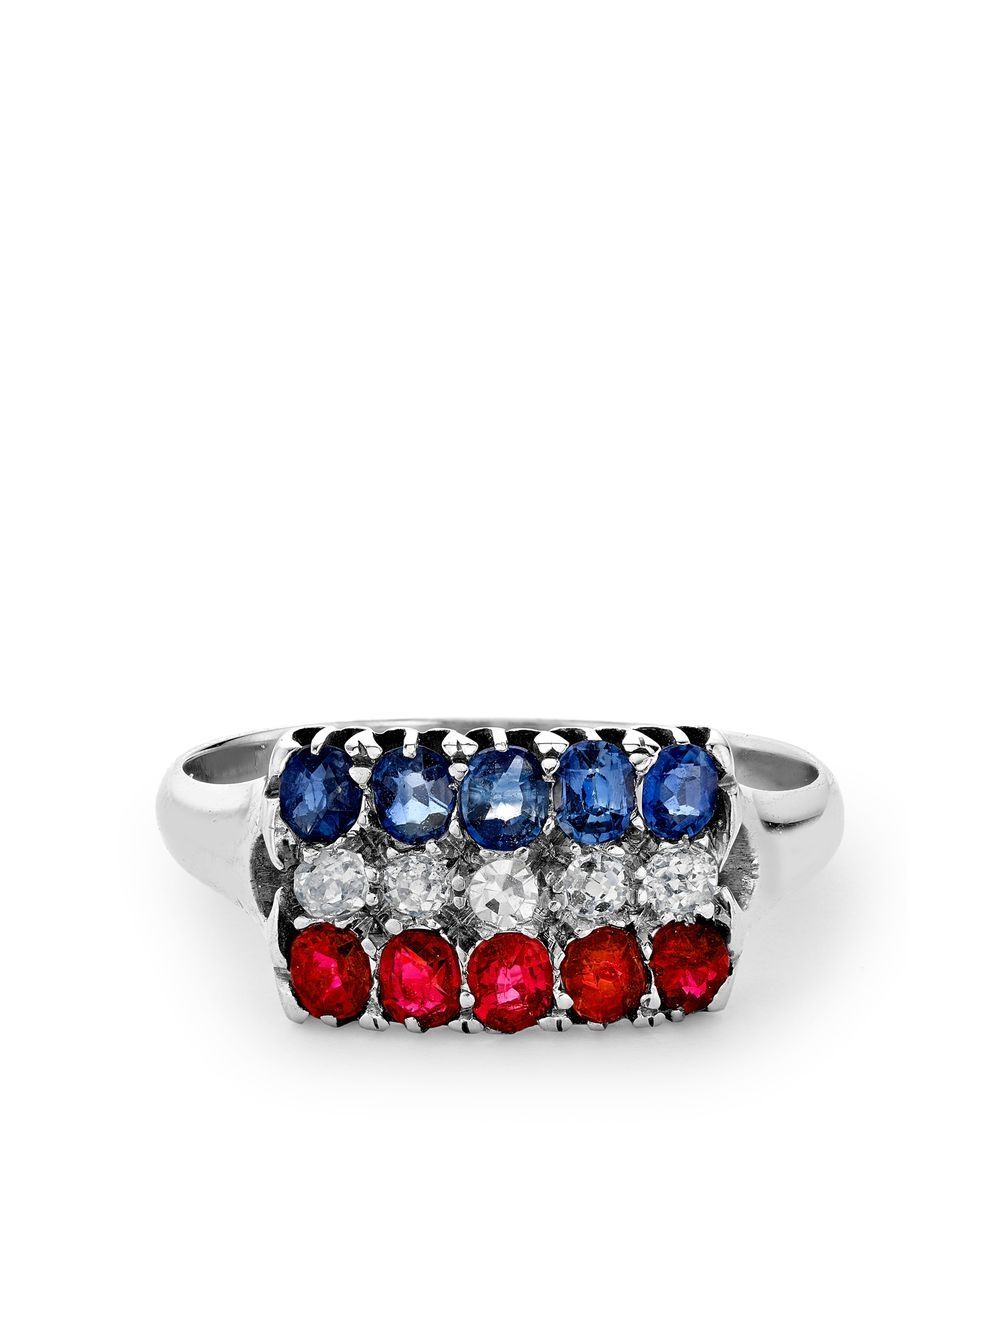 Pre-owned Pragnell Vintage 1893 18kt White Gold Three Row Diamond, Ruby And Sapphire Ring In Silver